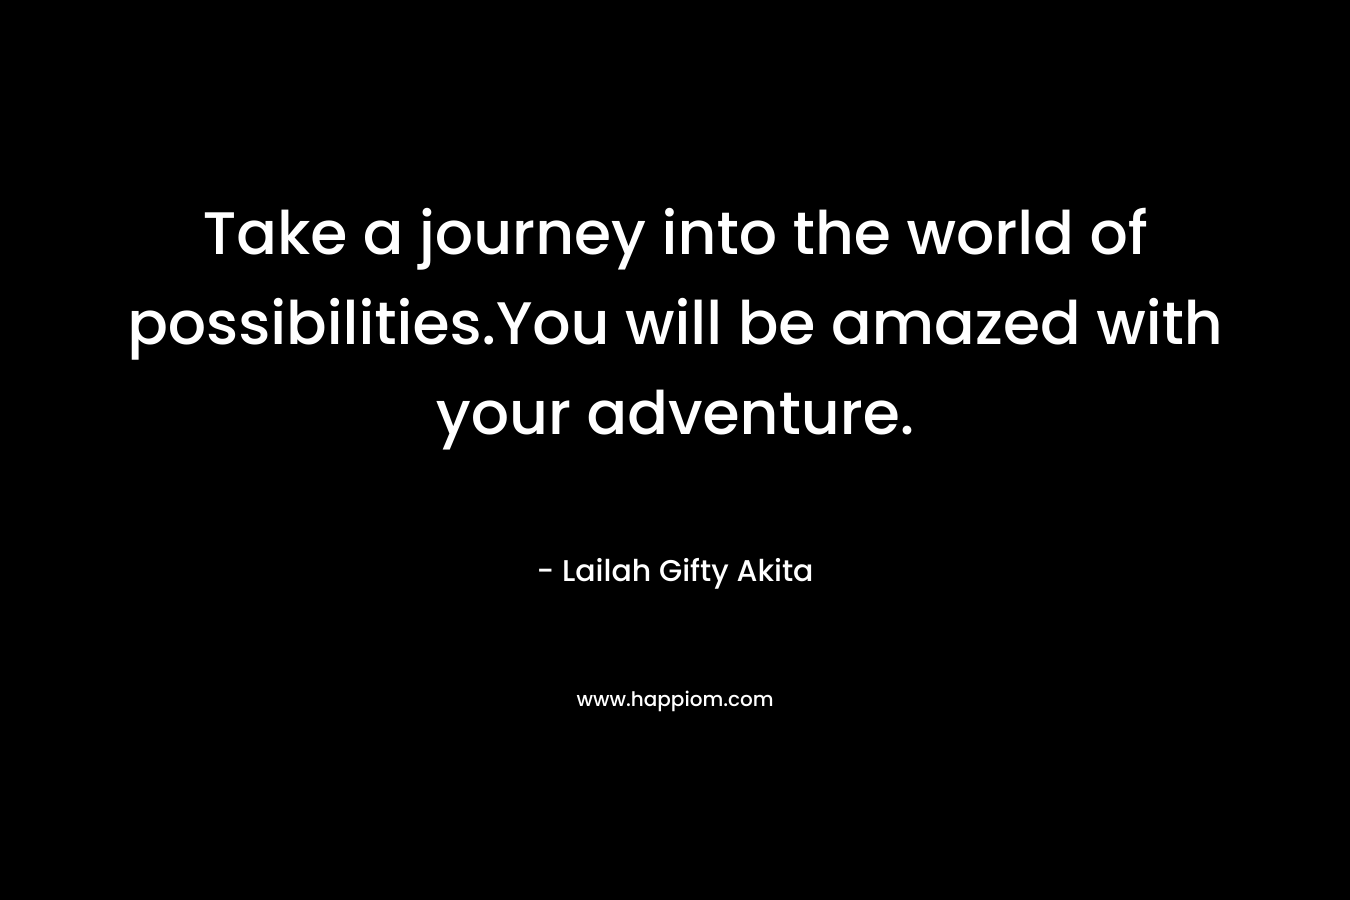 Take a journey into the world of possibilities.You will be amazed with your adventure.